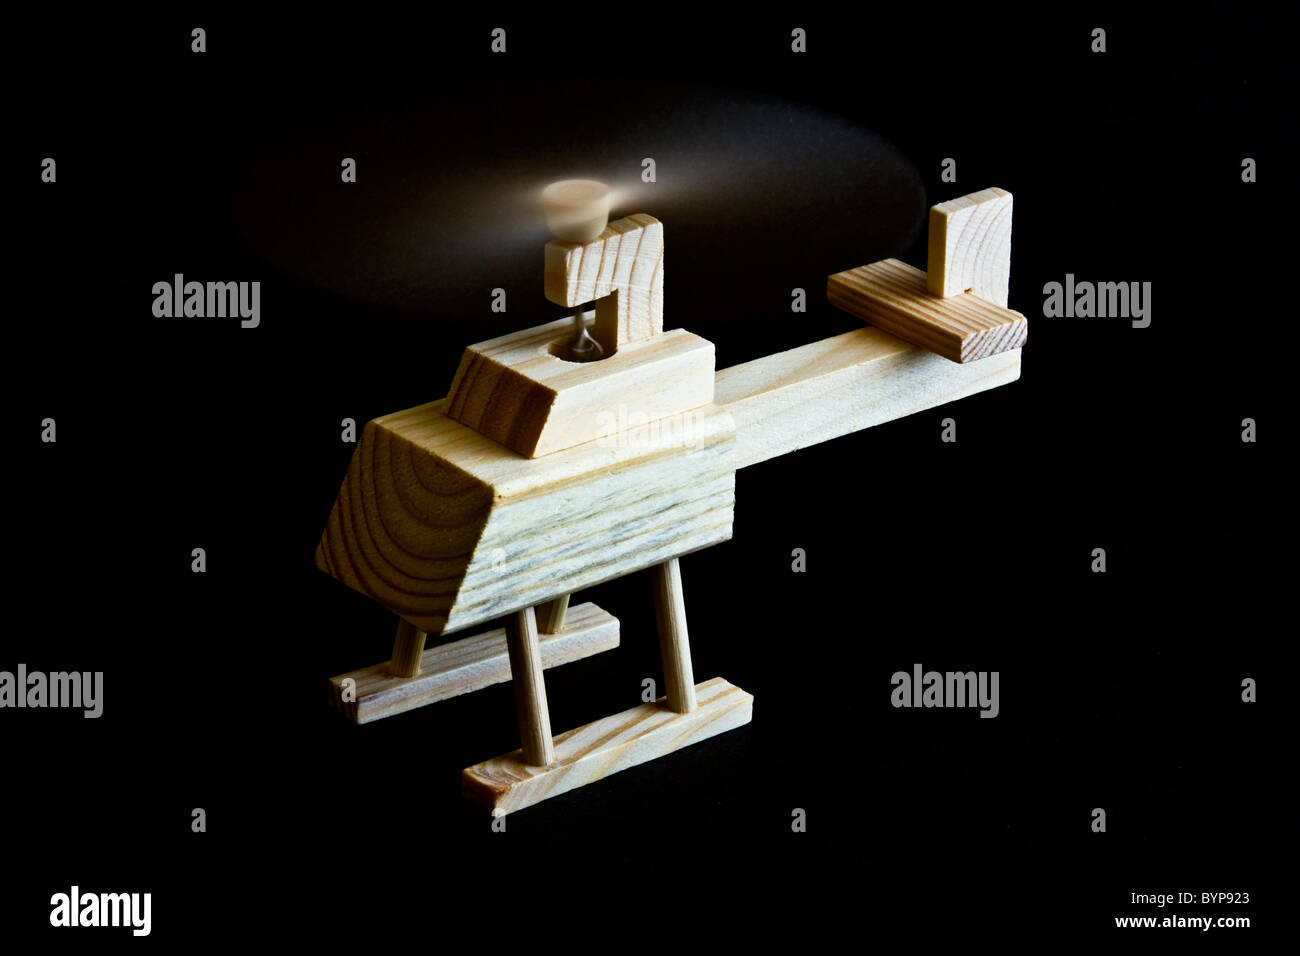 Wooden toy helicopter with spinning blade on Black background Stock Photo